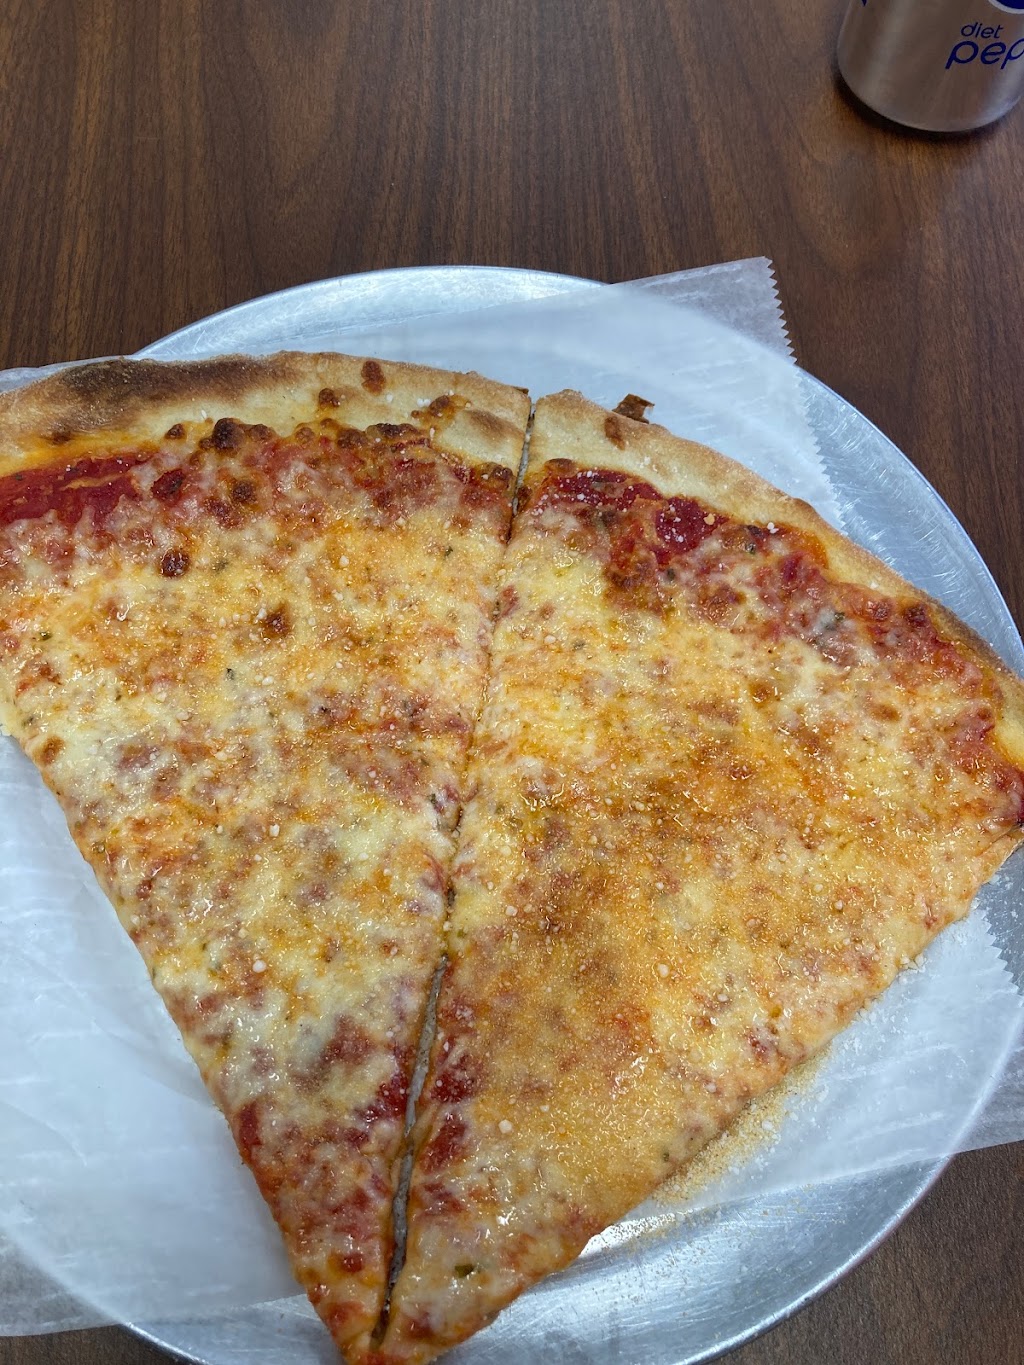 Old Colony Pizza | 1207 Old Colony Rd Unit B, Wallingford, CT 06492 | Phone: (203) 678-4687